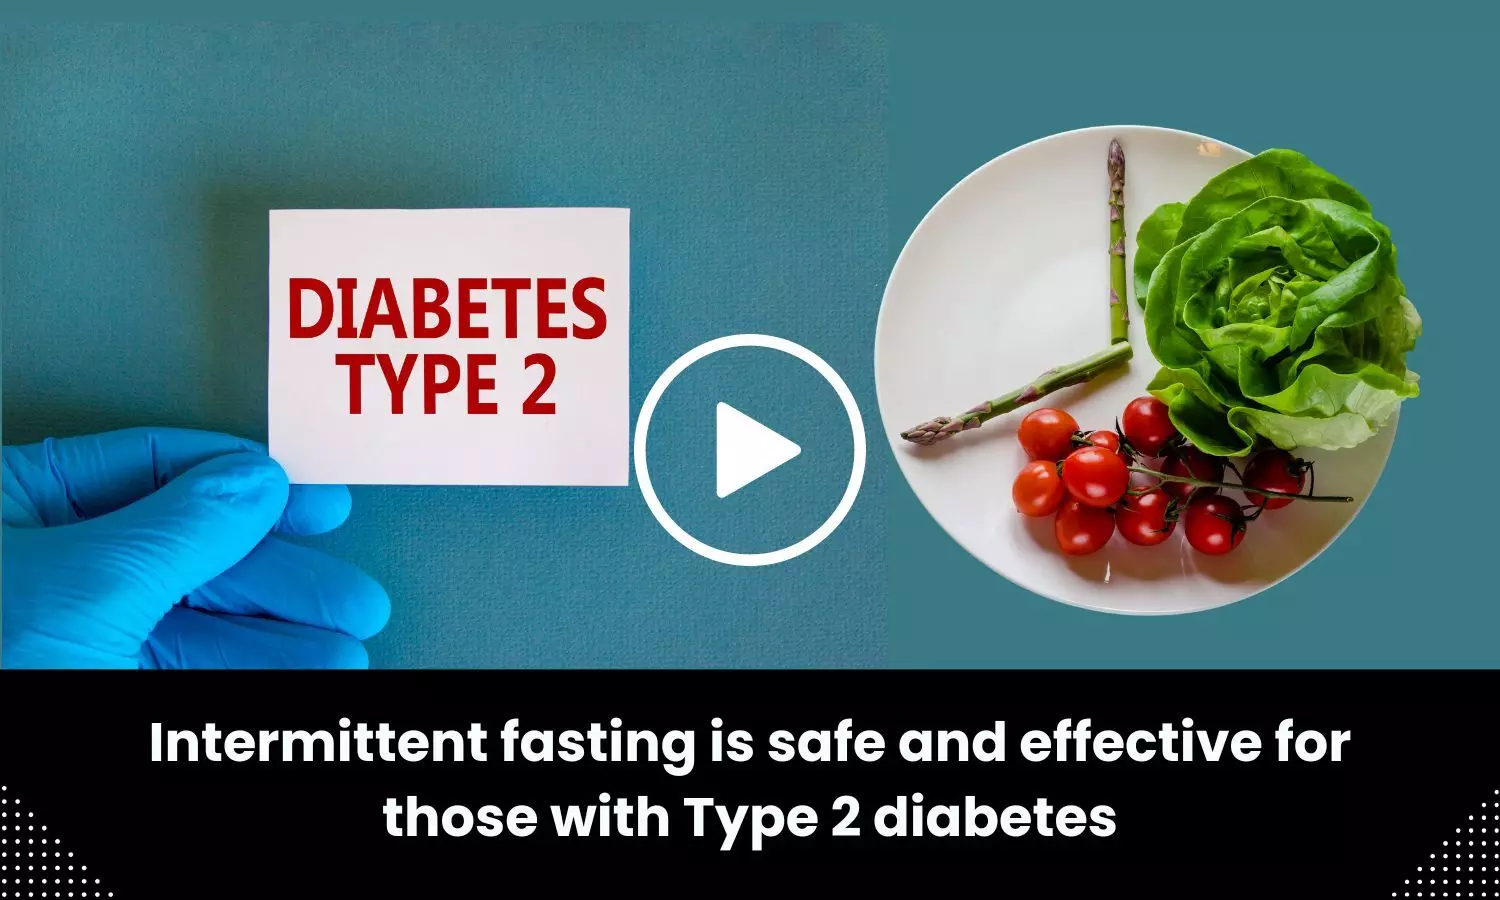 Intermittent fasting is safe and effective for those with Type 2 diabetes